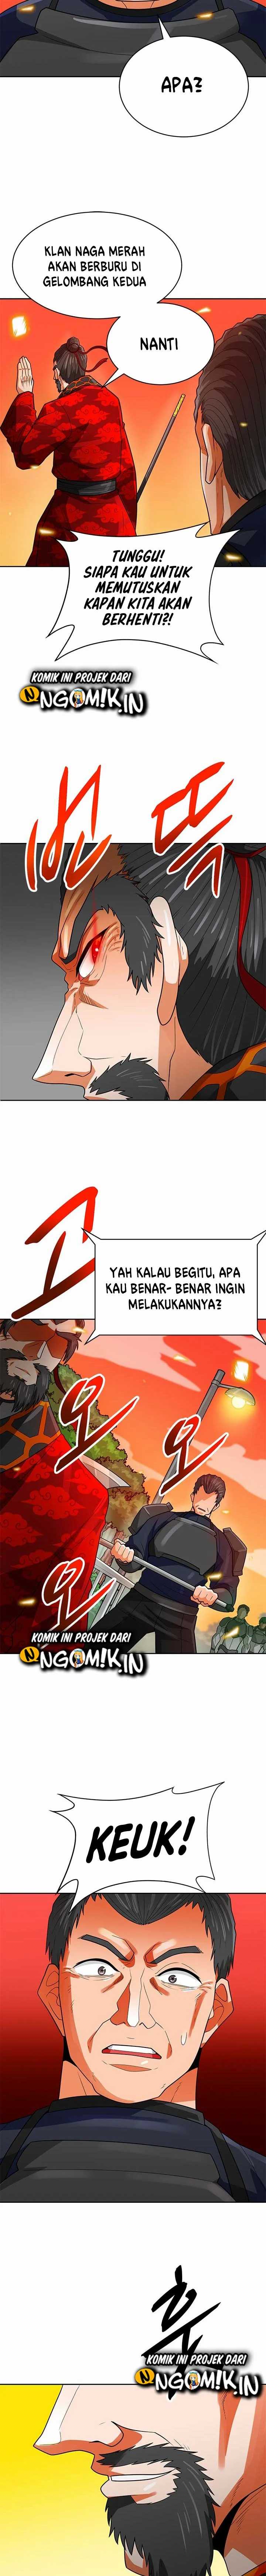 Auto Hunting Chapter 85